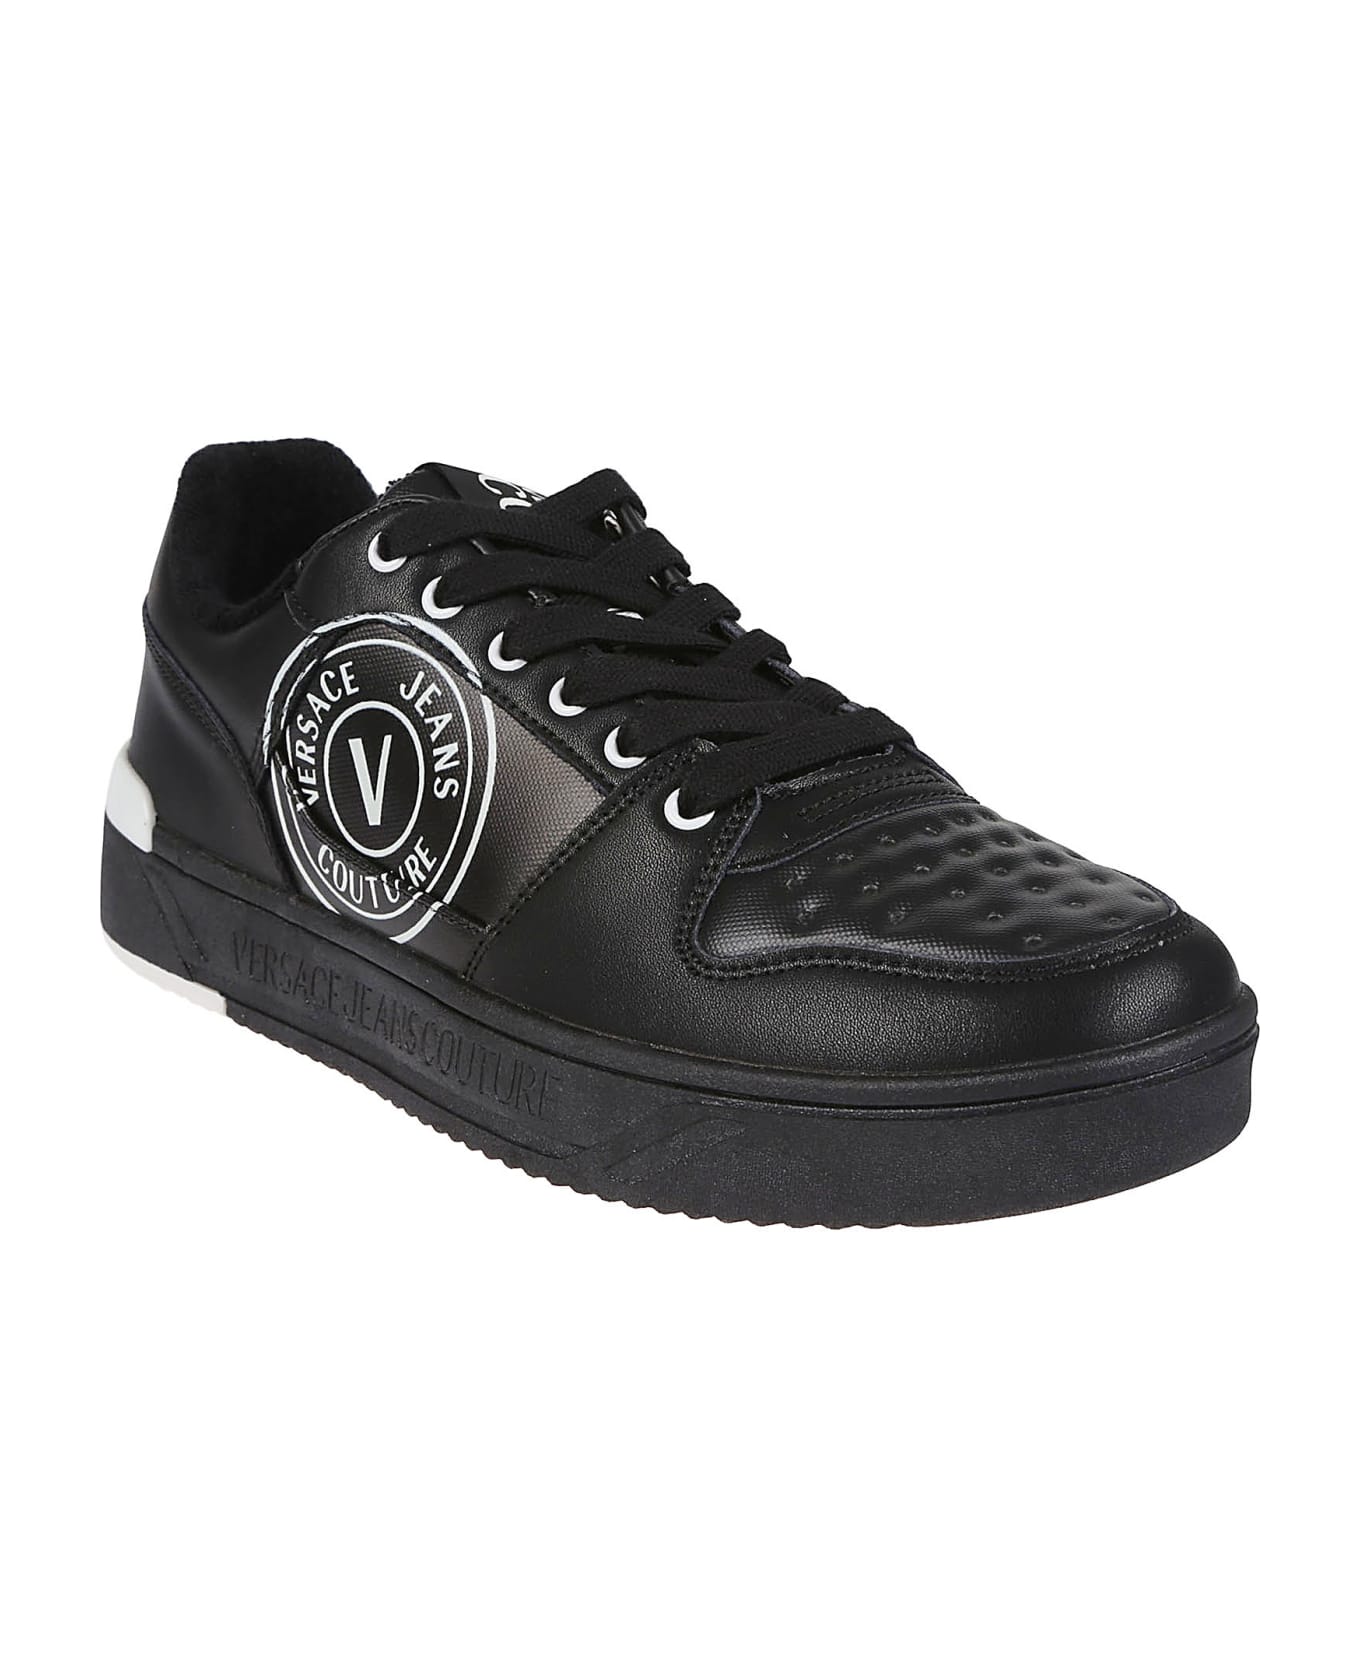 Versace Jeans Couture Starlight Sj1 Sneakers - Black スニーカー